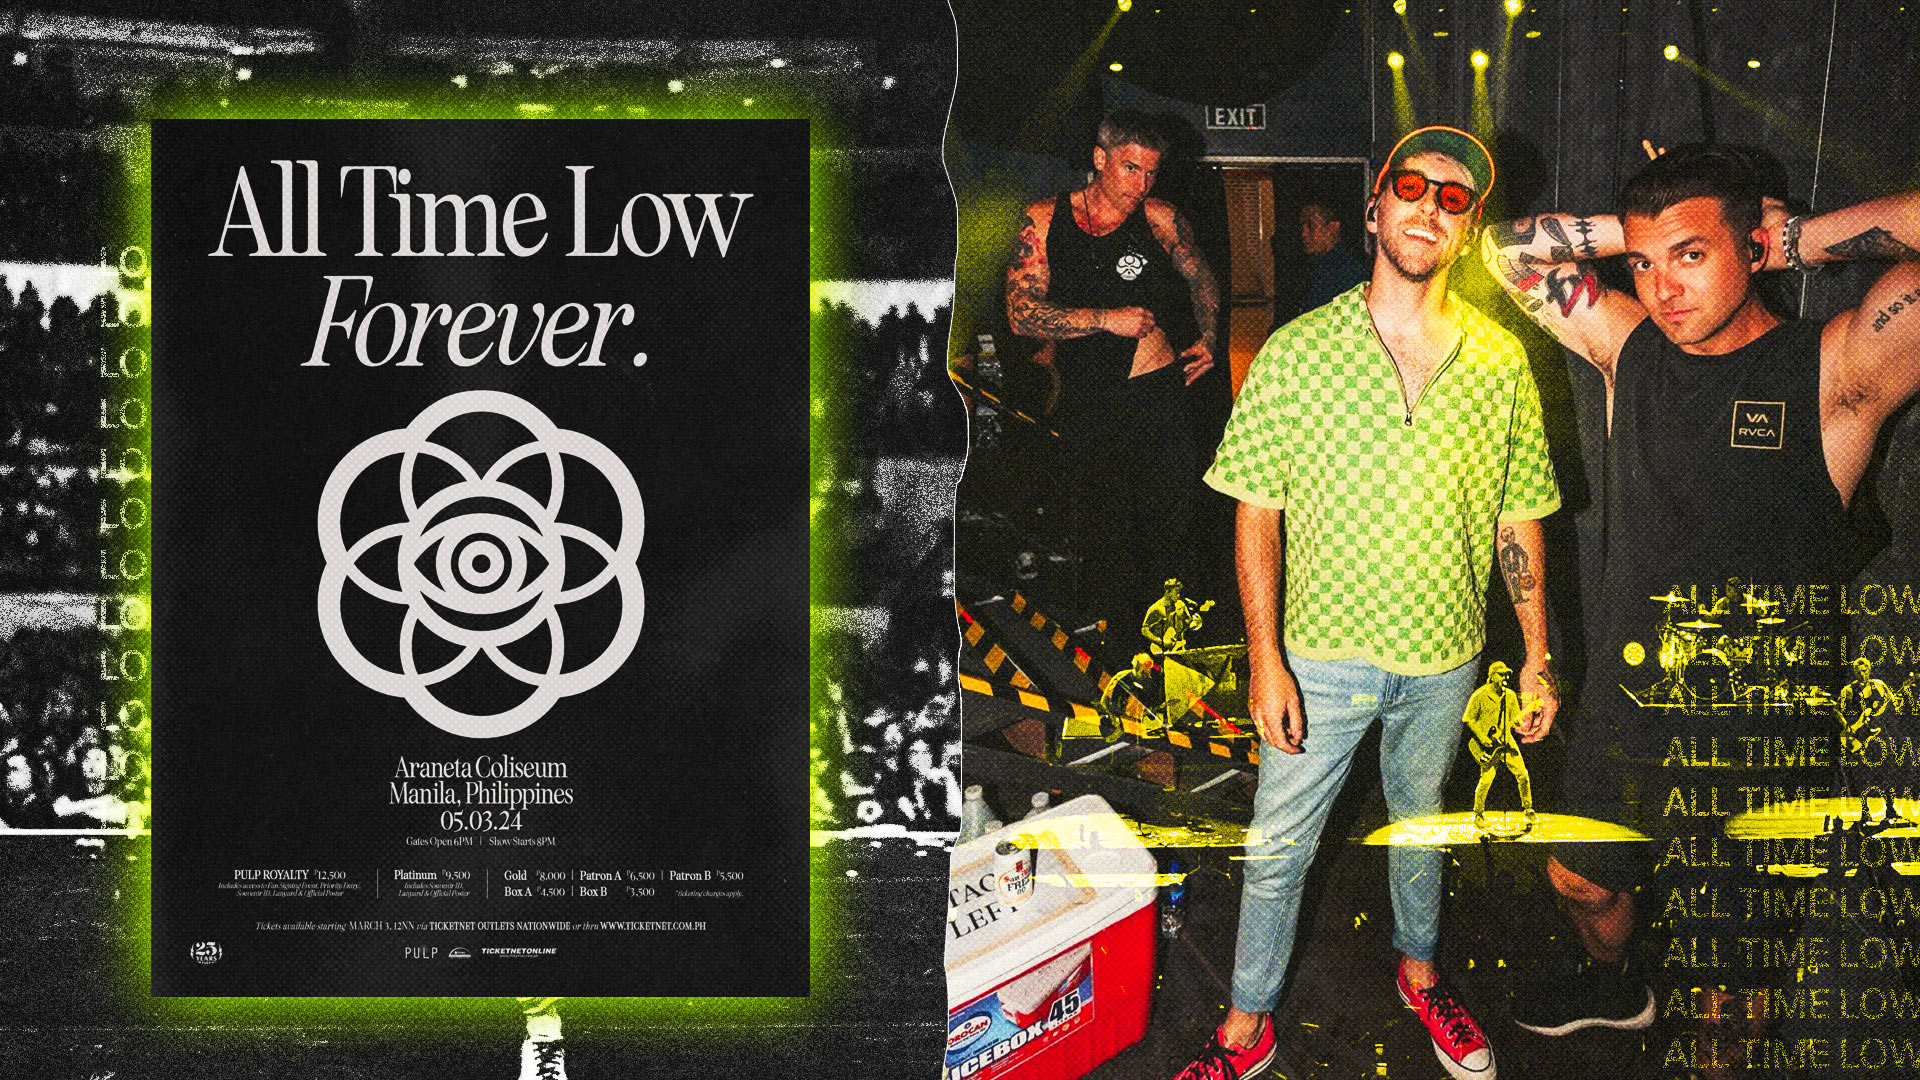 How All Time Low Celebrated Twenty Years of Music At Their Forever Tour Concert In Manila